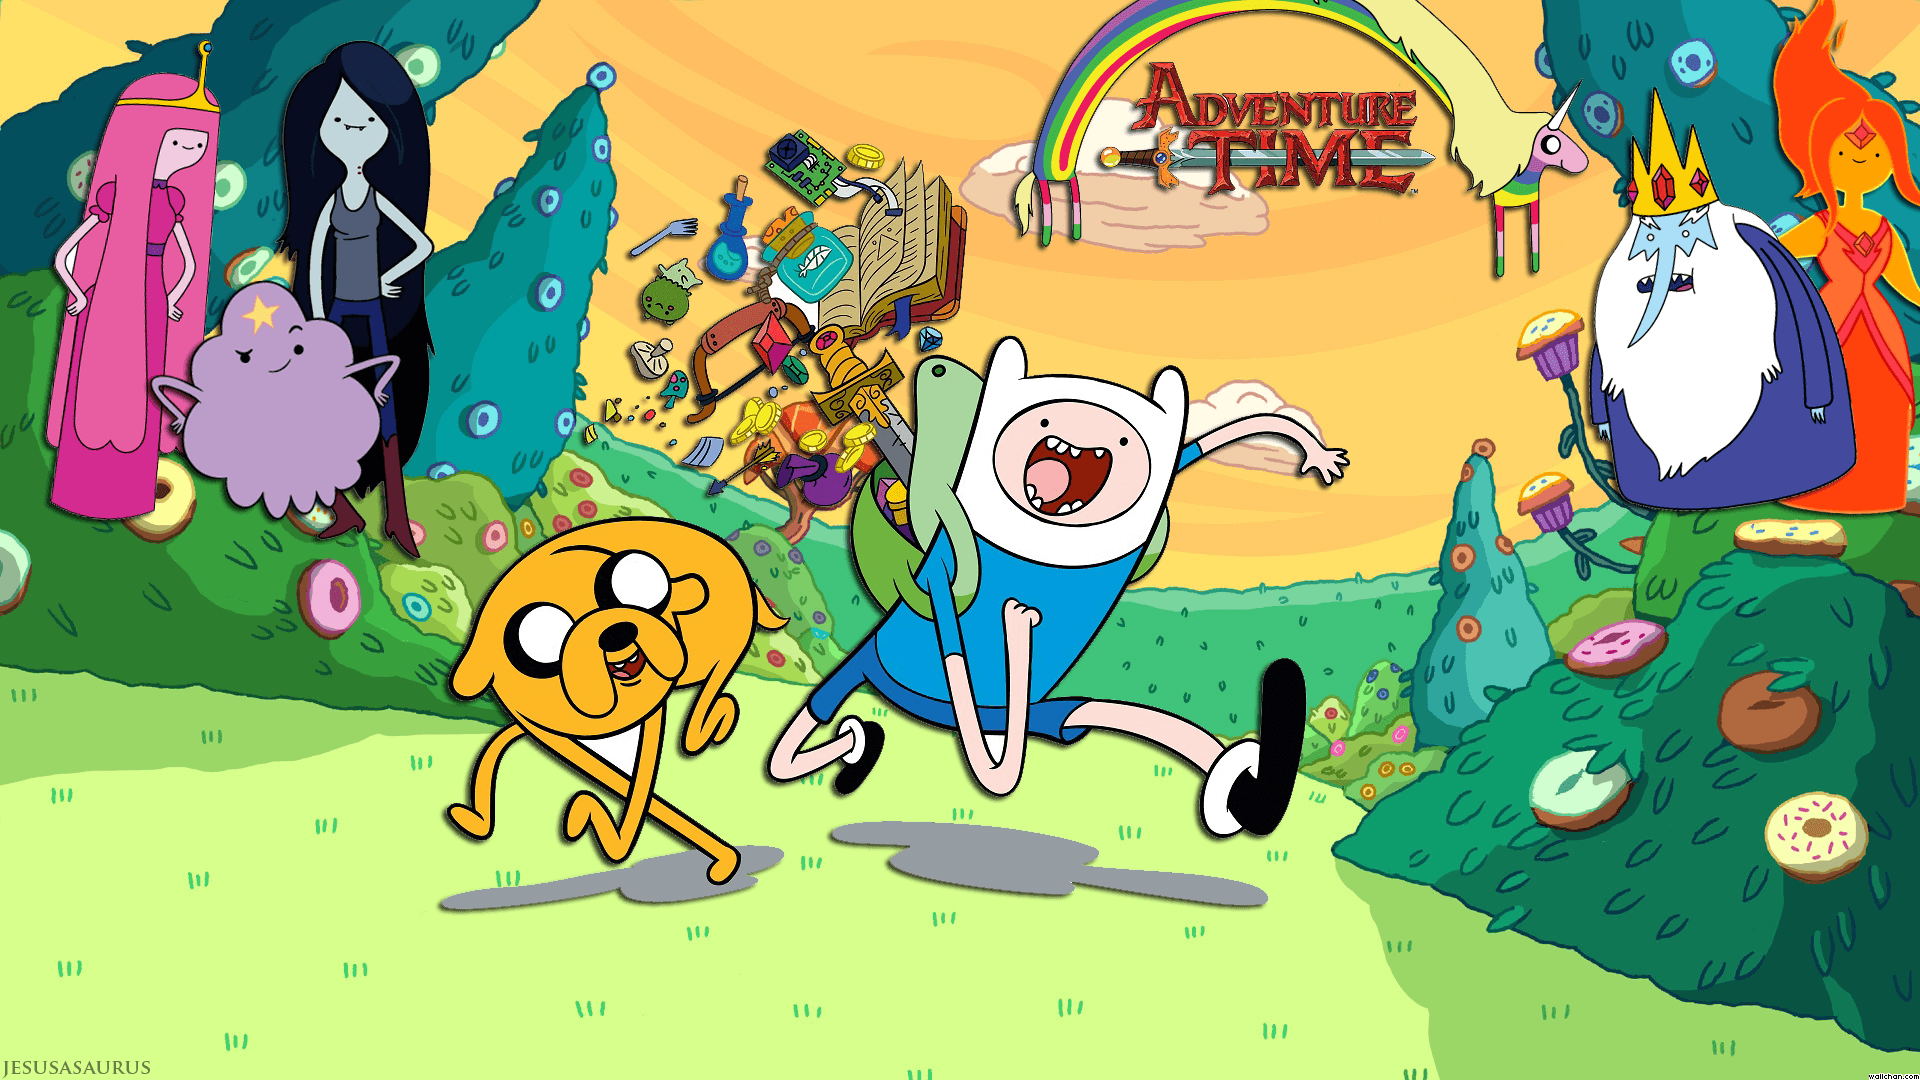 New Adventure Time Phone wallpapers Like or reblog if you use credit not  needed but appr  Adventure time wallpaper Adventure time marceline Jake adventure  time